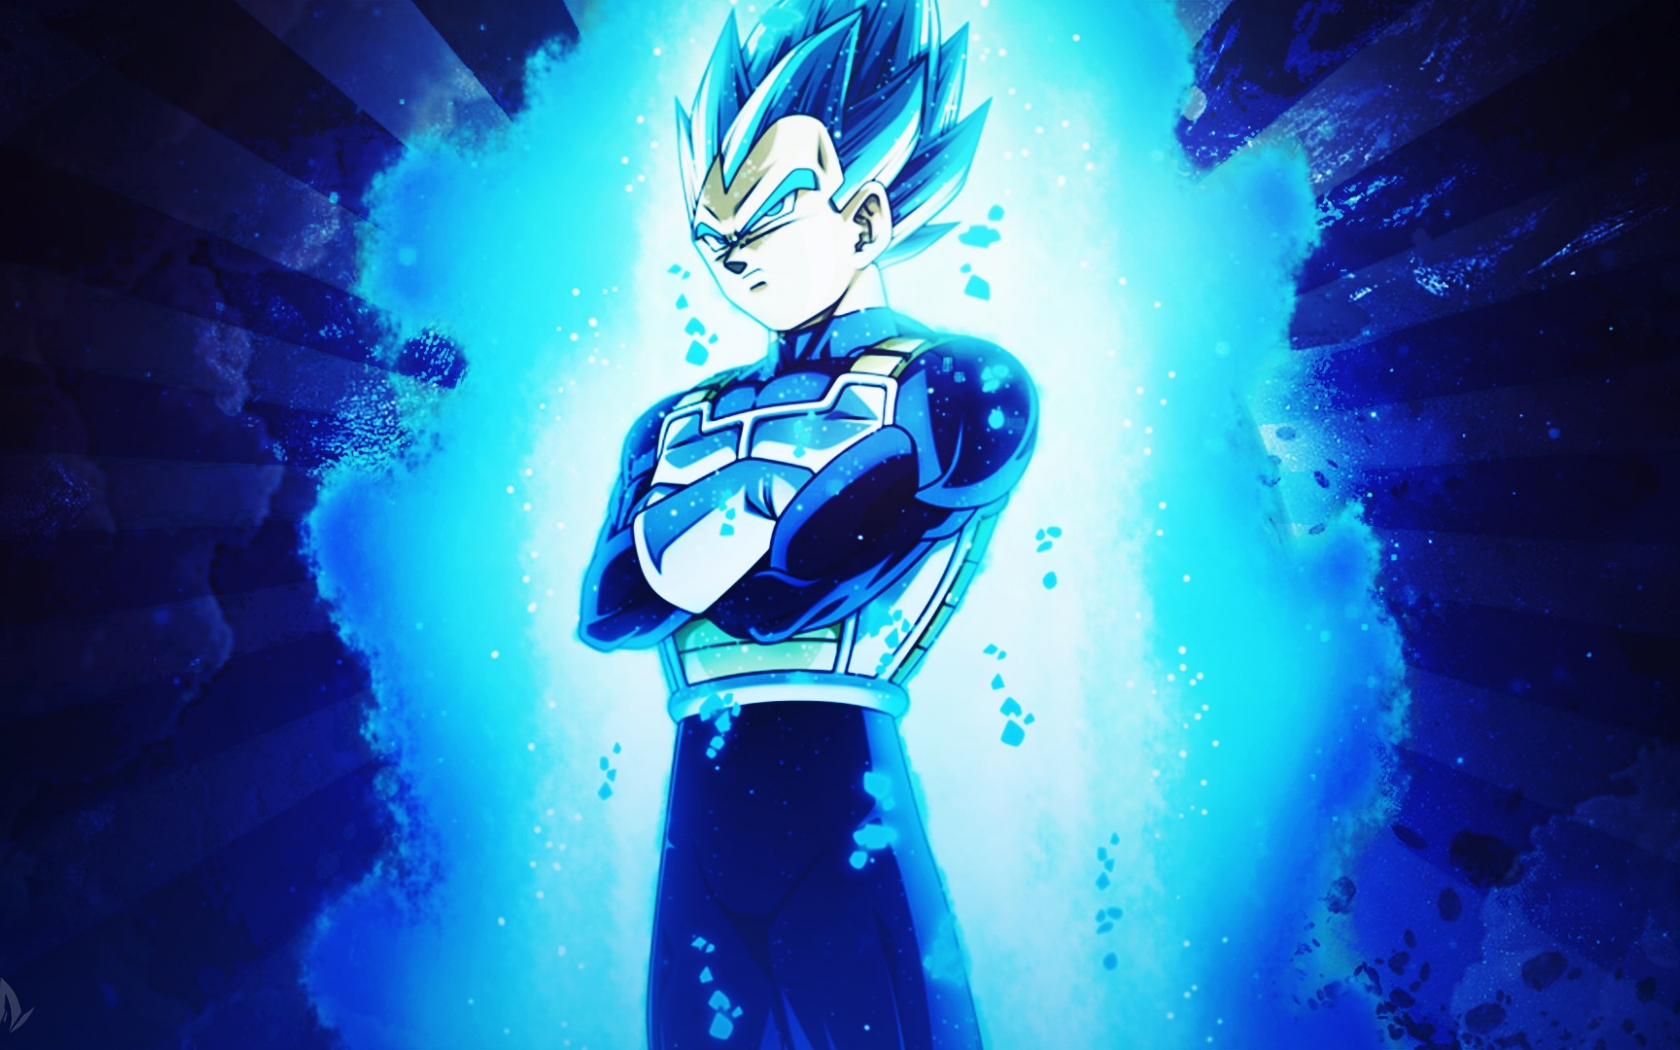 vegeta wallpaper, anime, animation, fictional character, dragon ball, space, electric blue, artwork, style